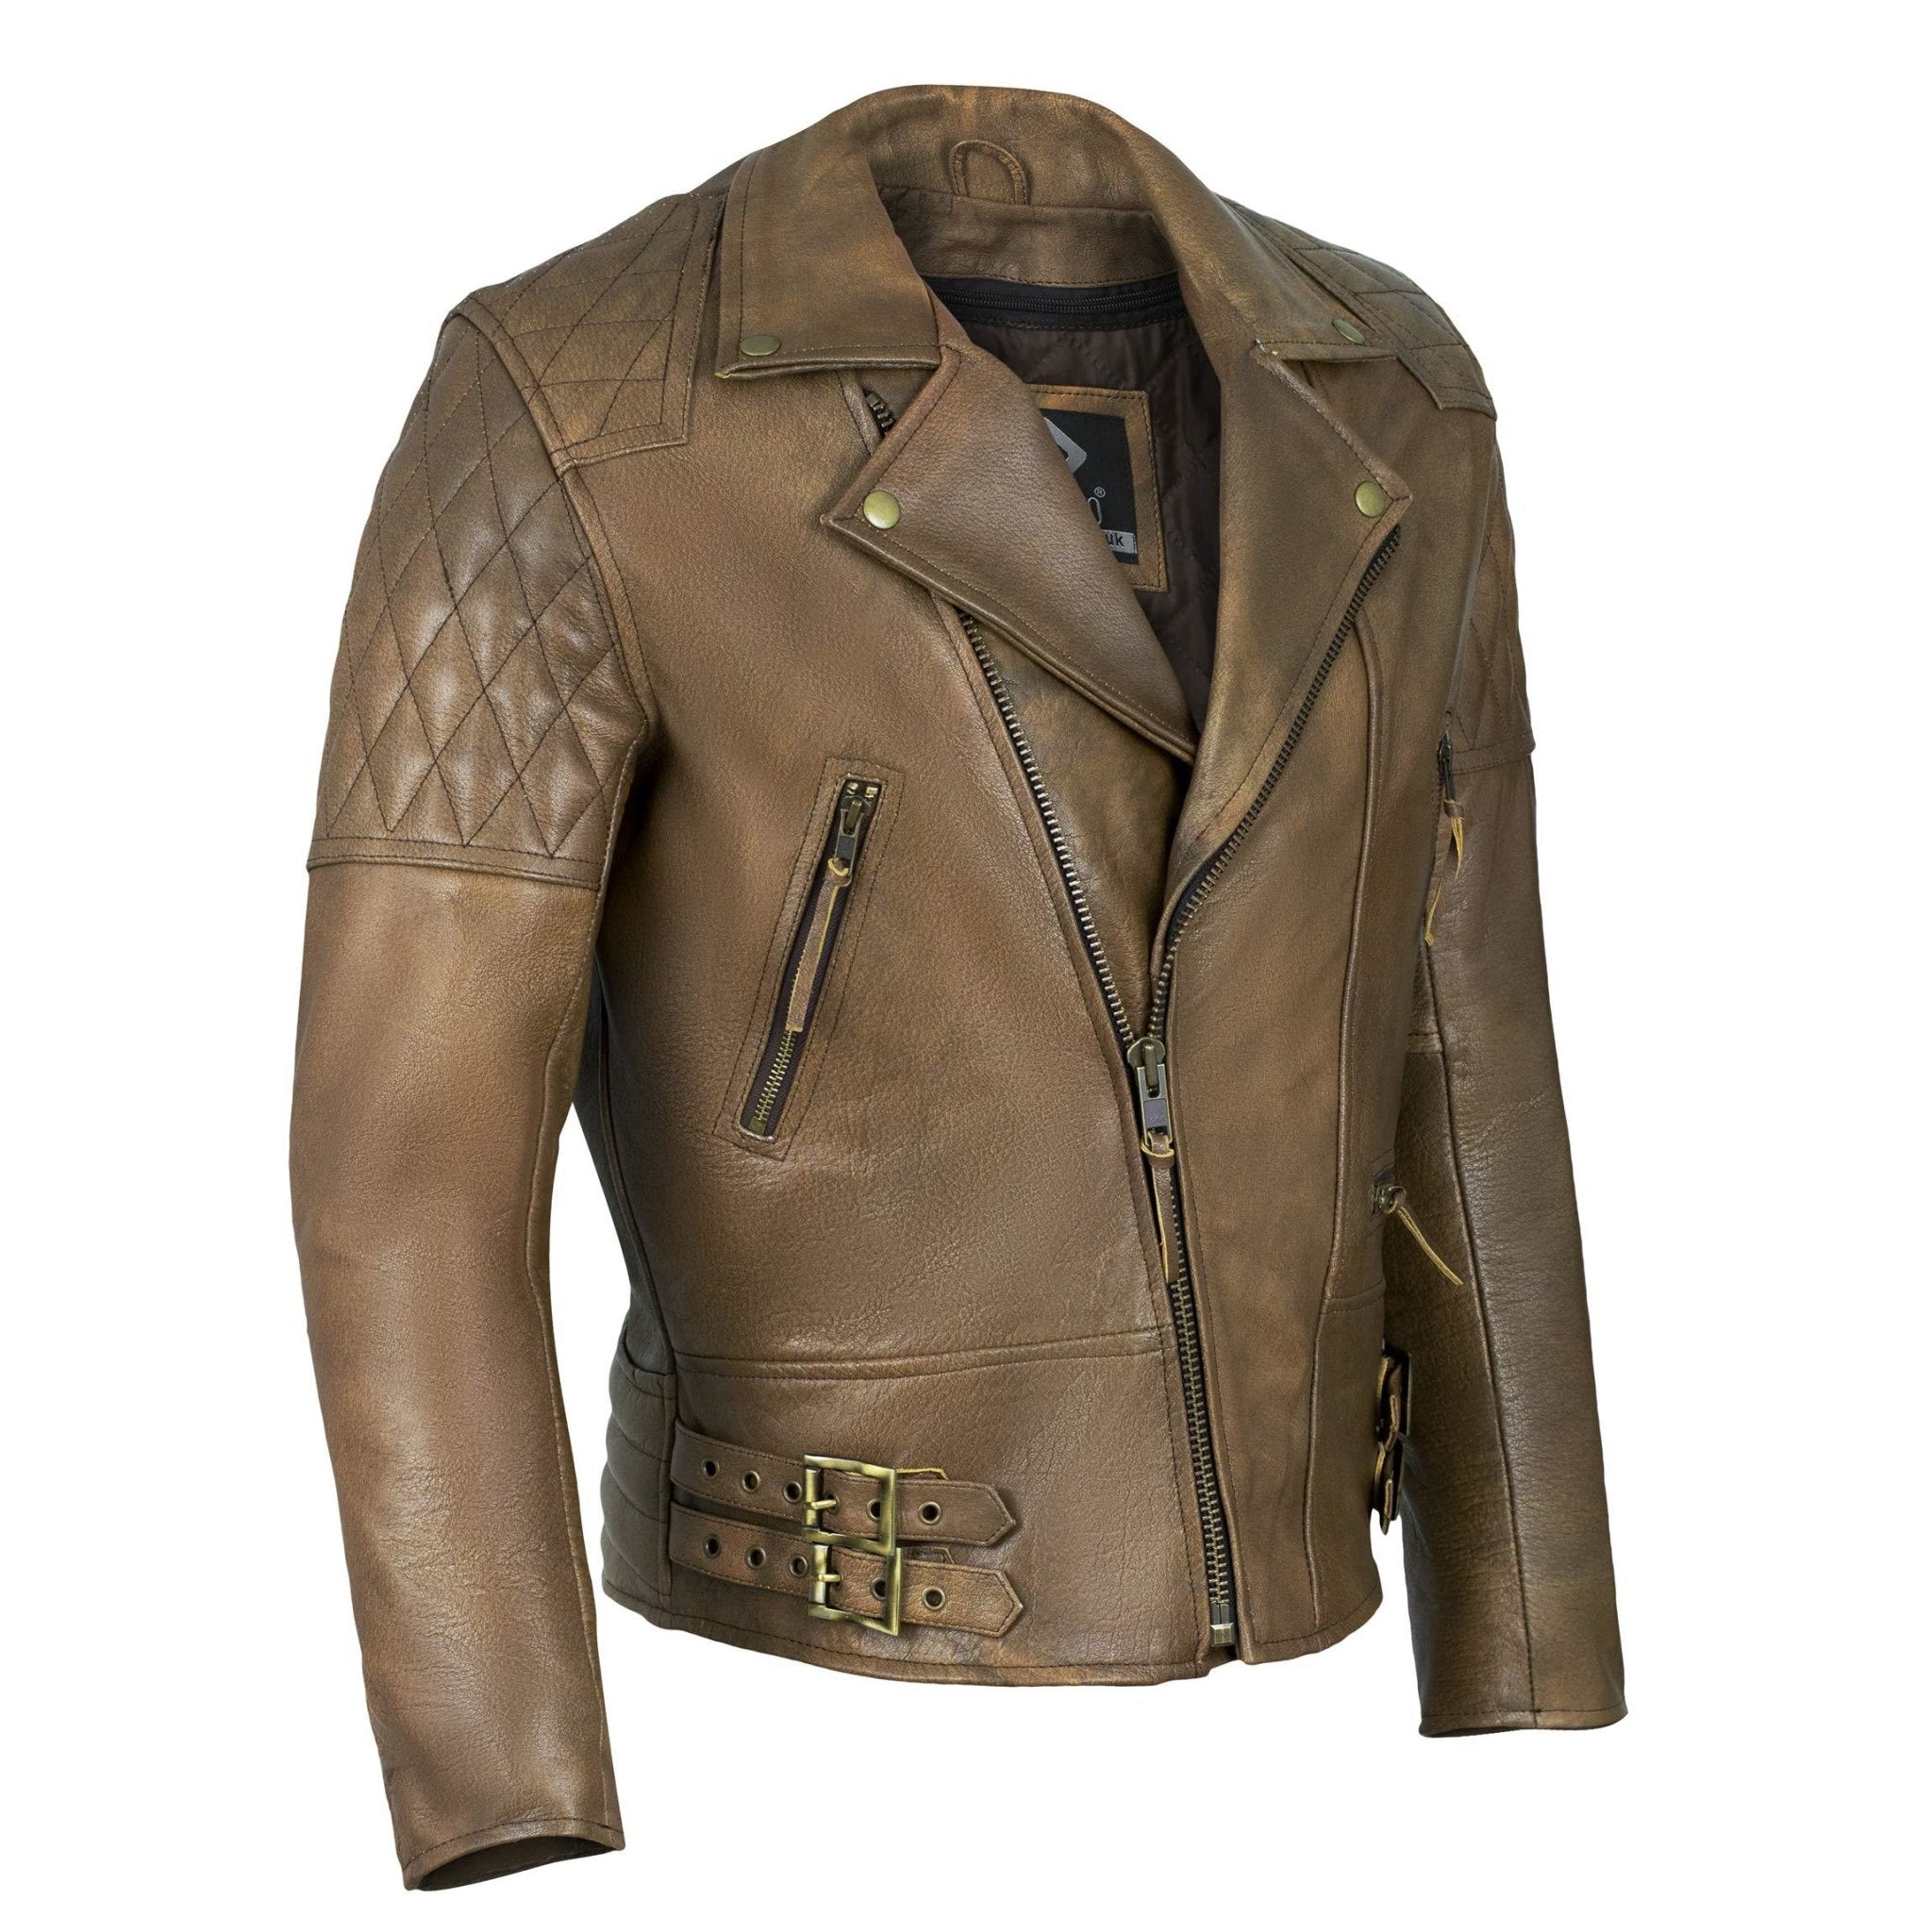 Classic Diamond Armoured Brown Biker Leather Jacket Motorcycle Mens Leather Jackets Women 7139